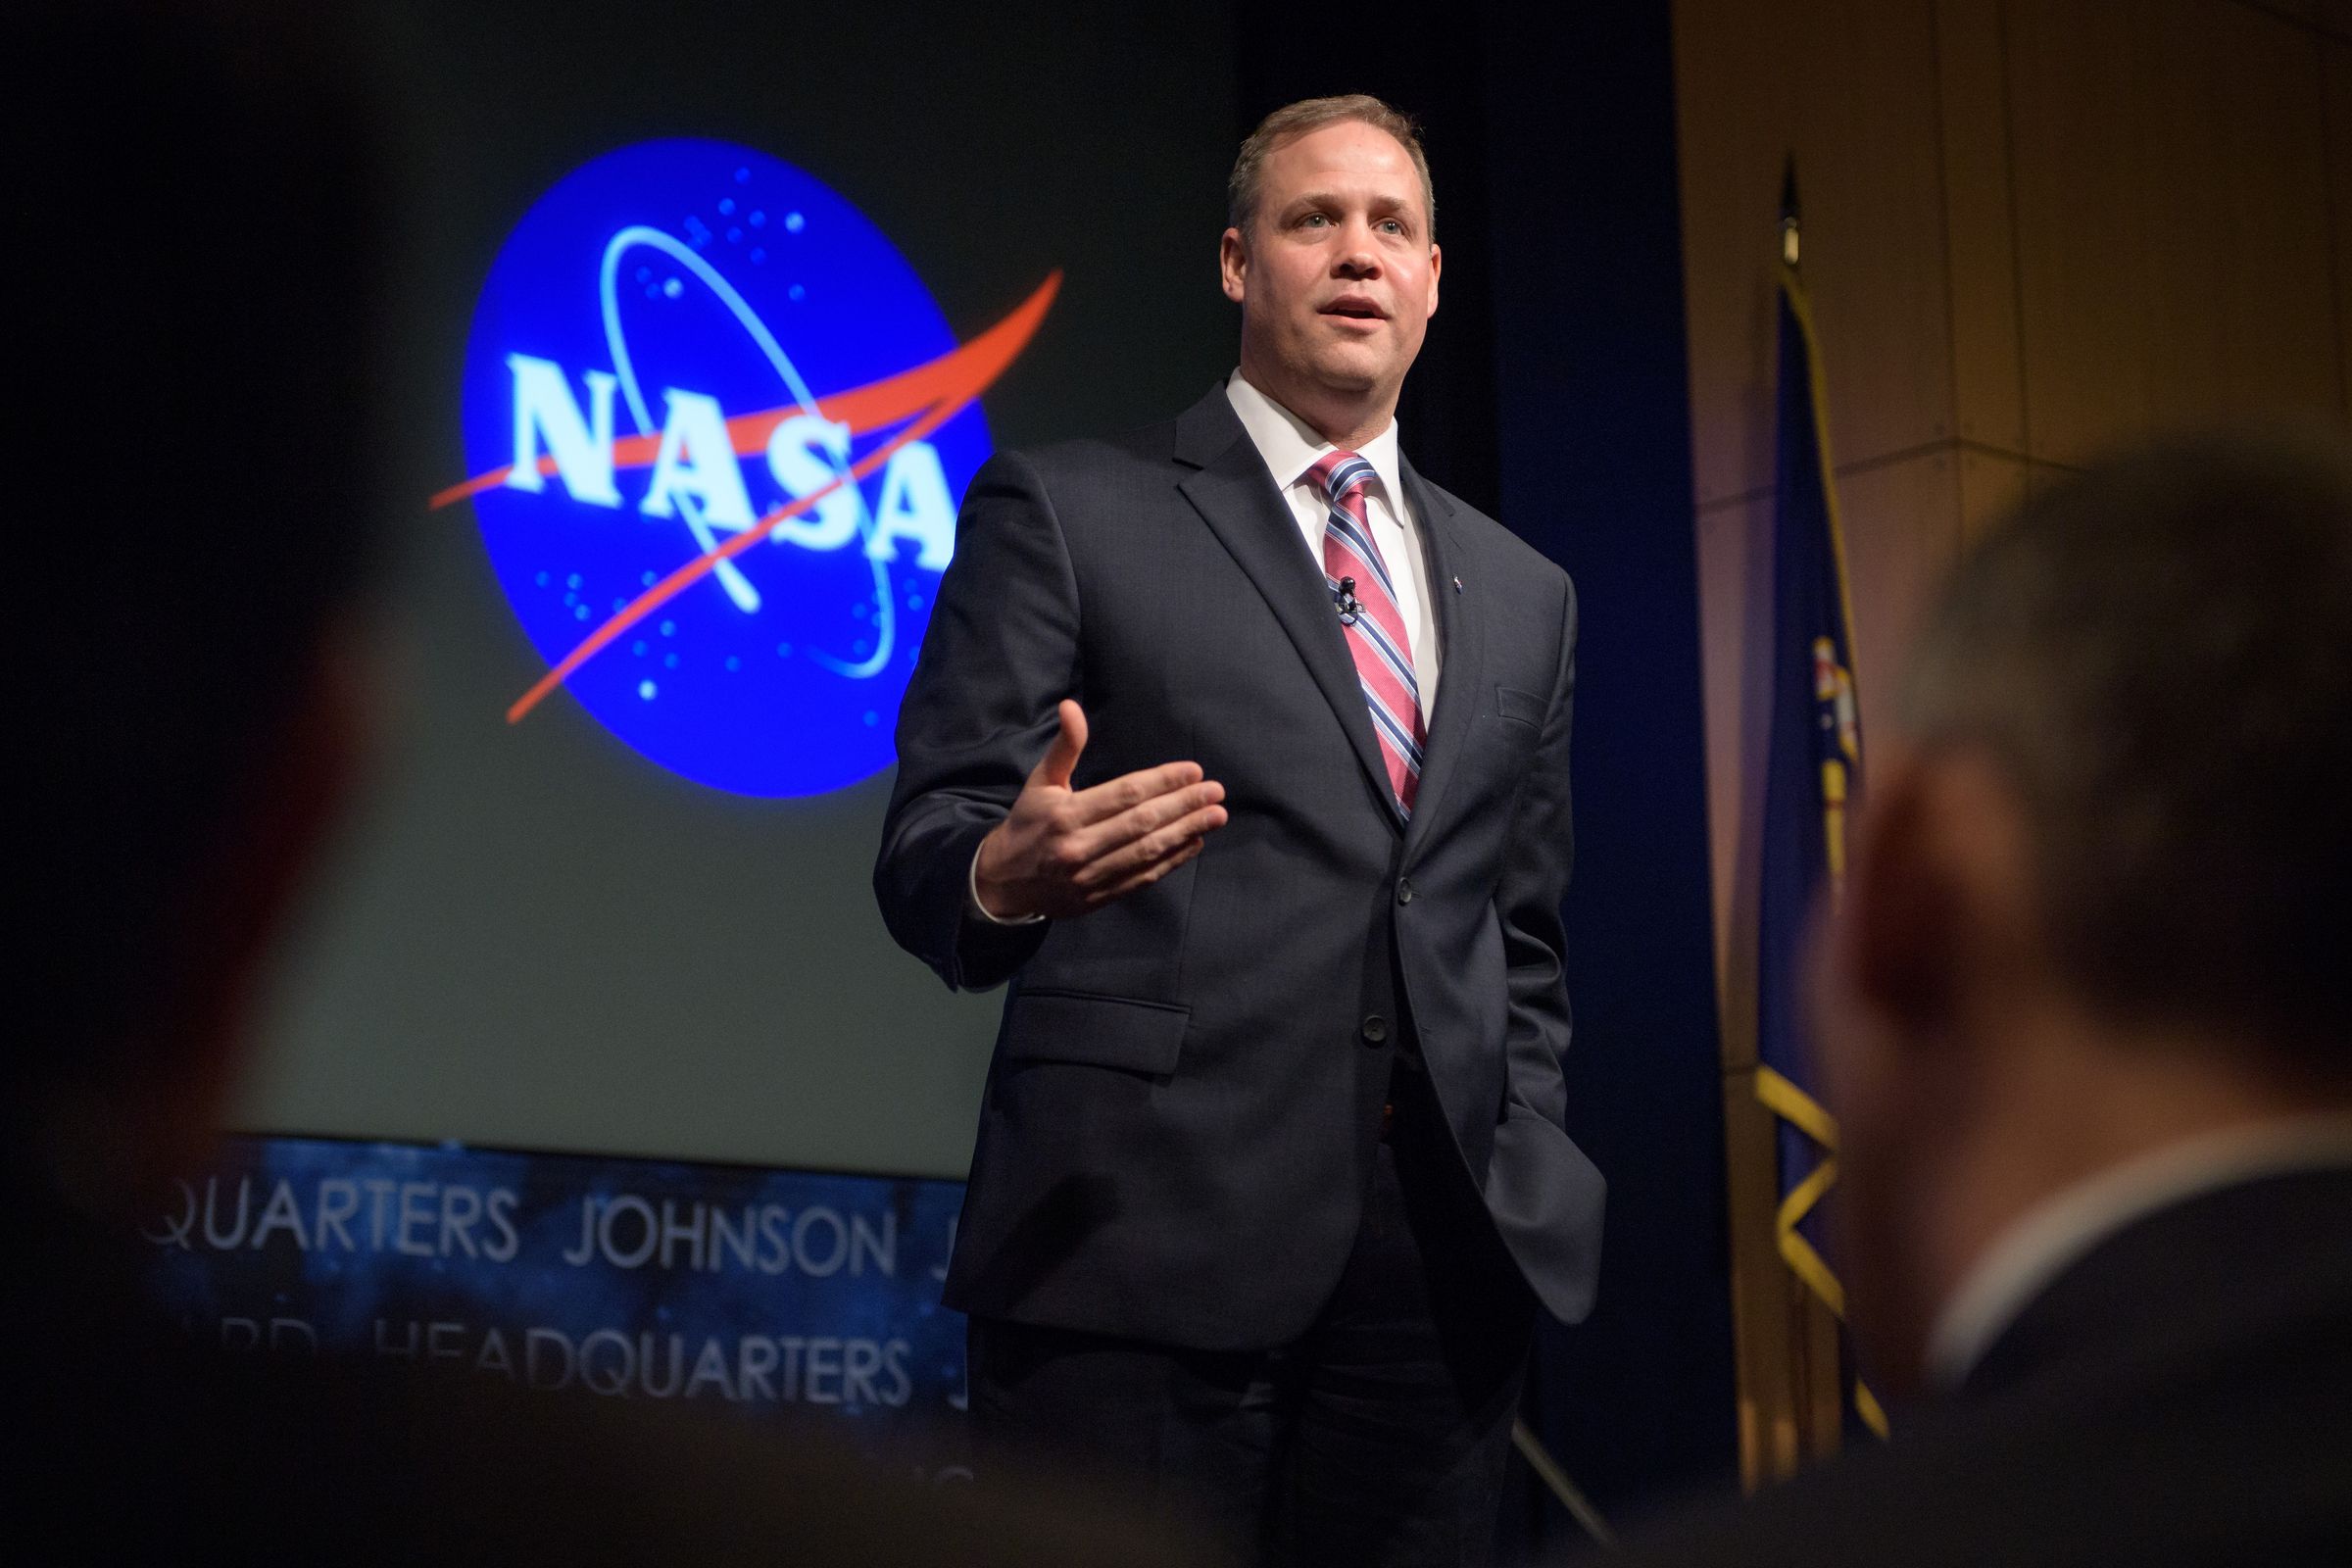 NASA administrator Jim Bridenstine addressed agency employees during a town hall meeting on Tuesday, January 29th.